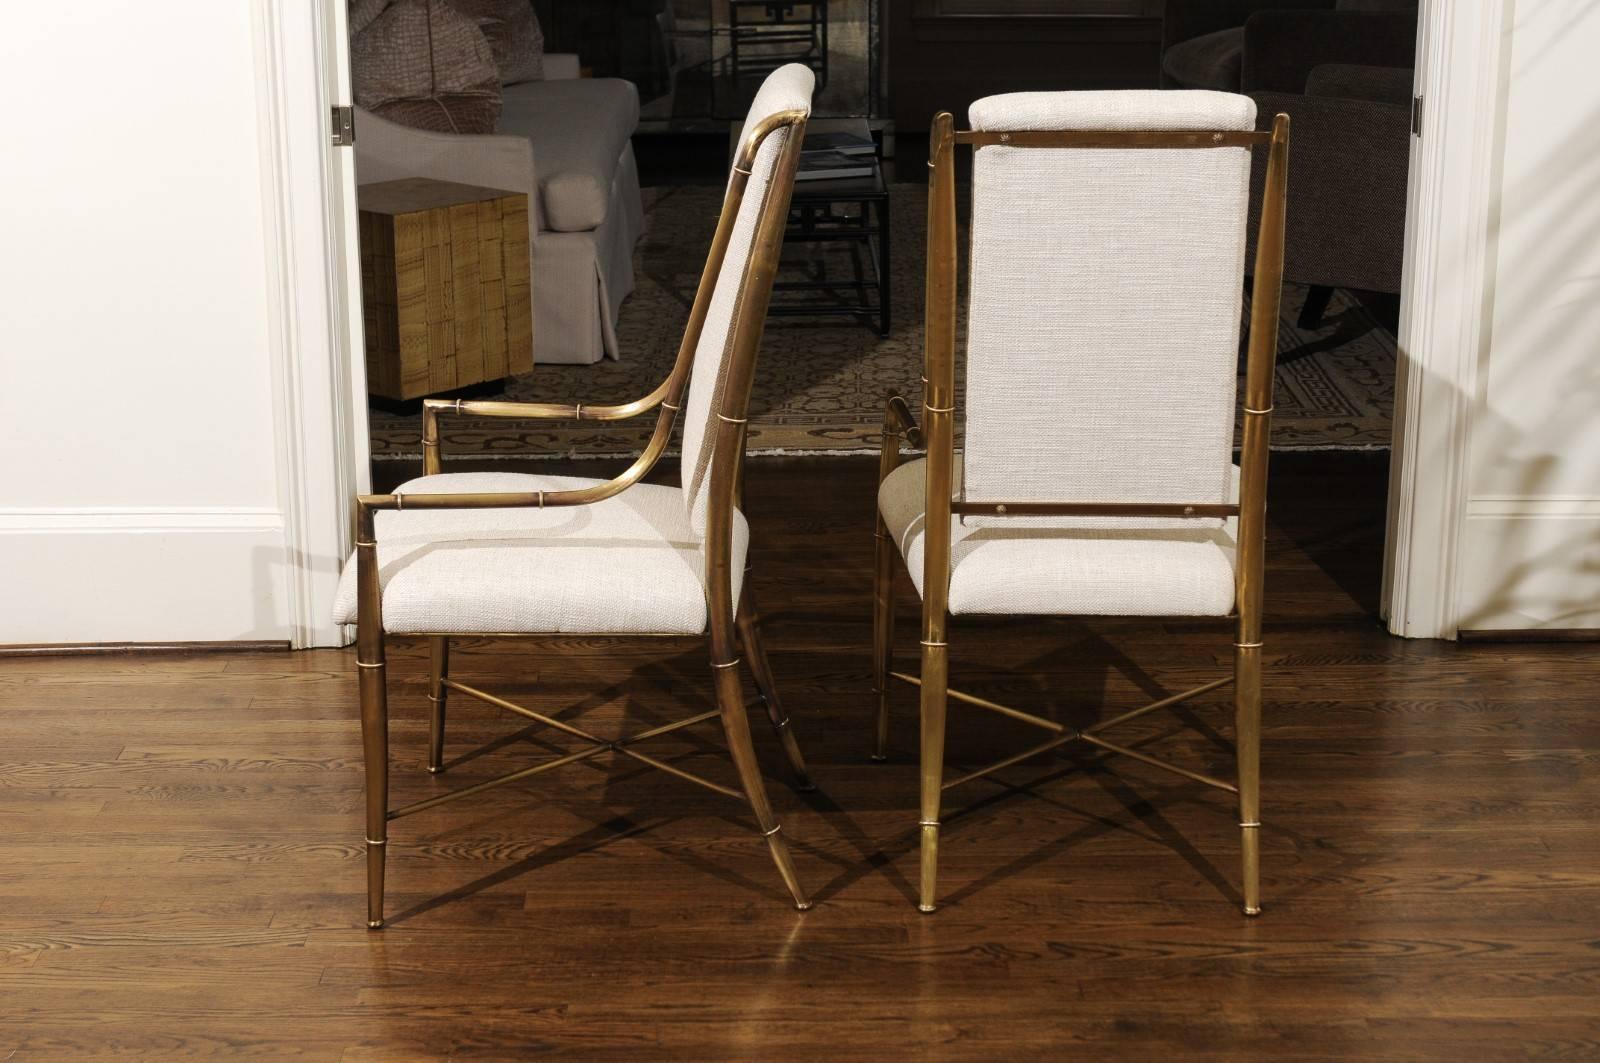 Magnificent Set of Ten Dining Chairs by Weiman/Warren Lloyd for Mastercraft In Excellent Condition For Sale In Atlanta, GA